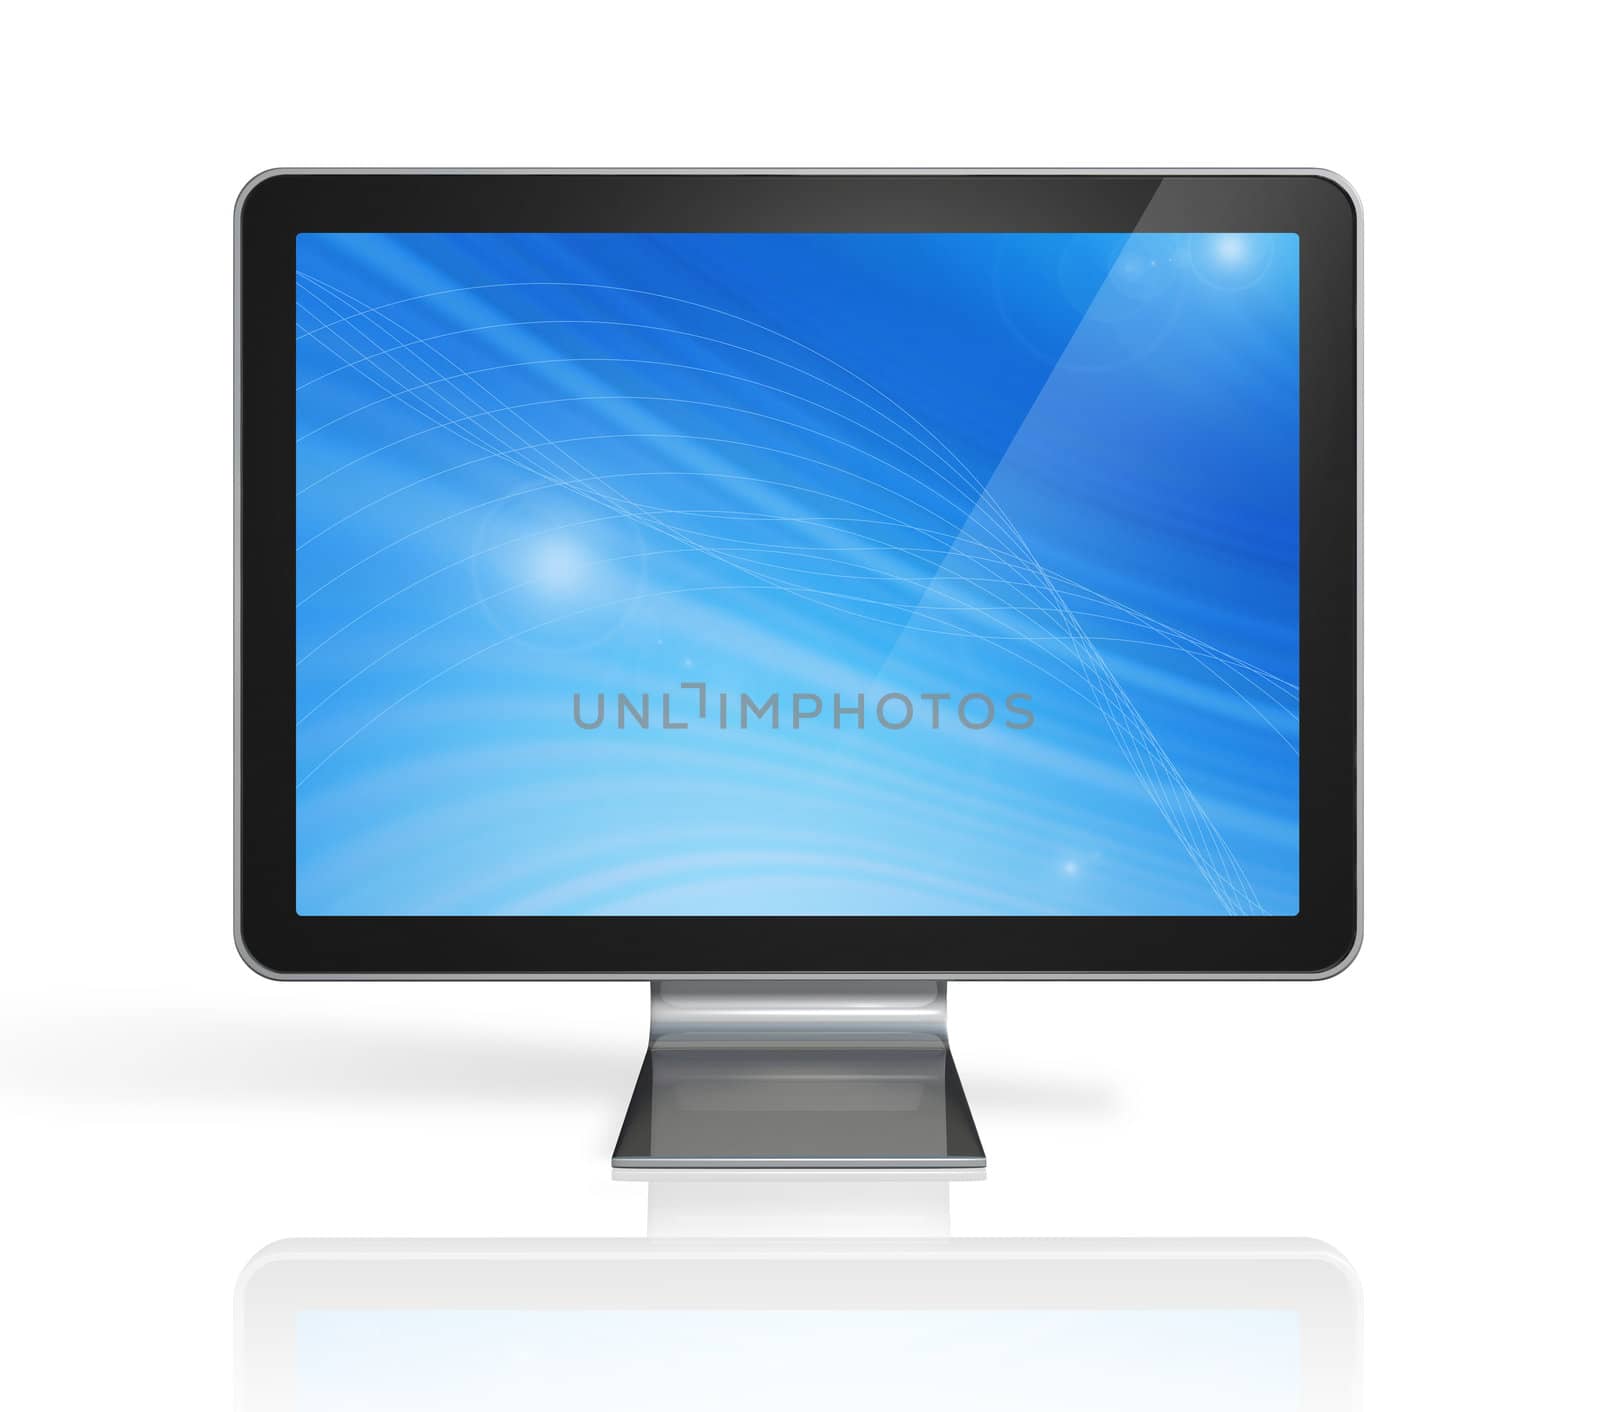 3D television, computer screen isolated on white. With 2 clipping paths : global scene clipping path and screen clipping path